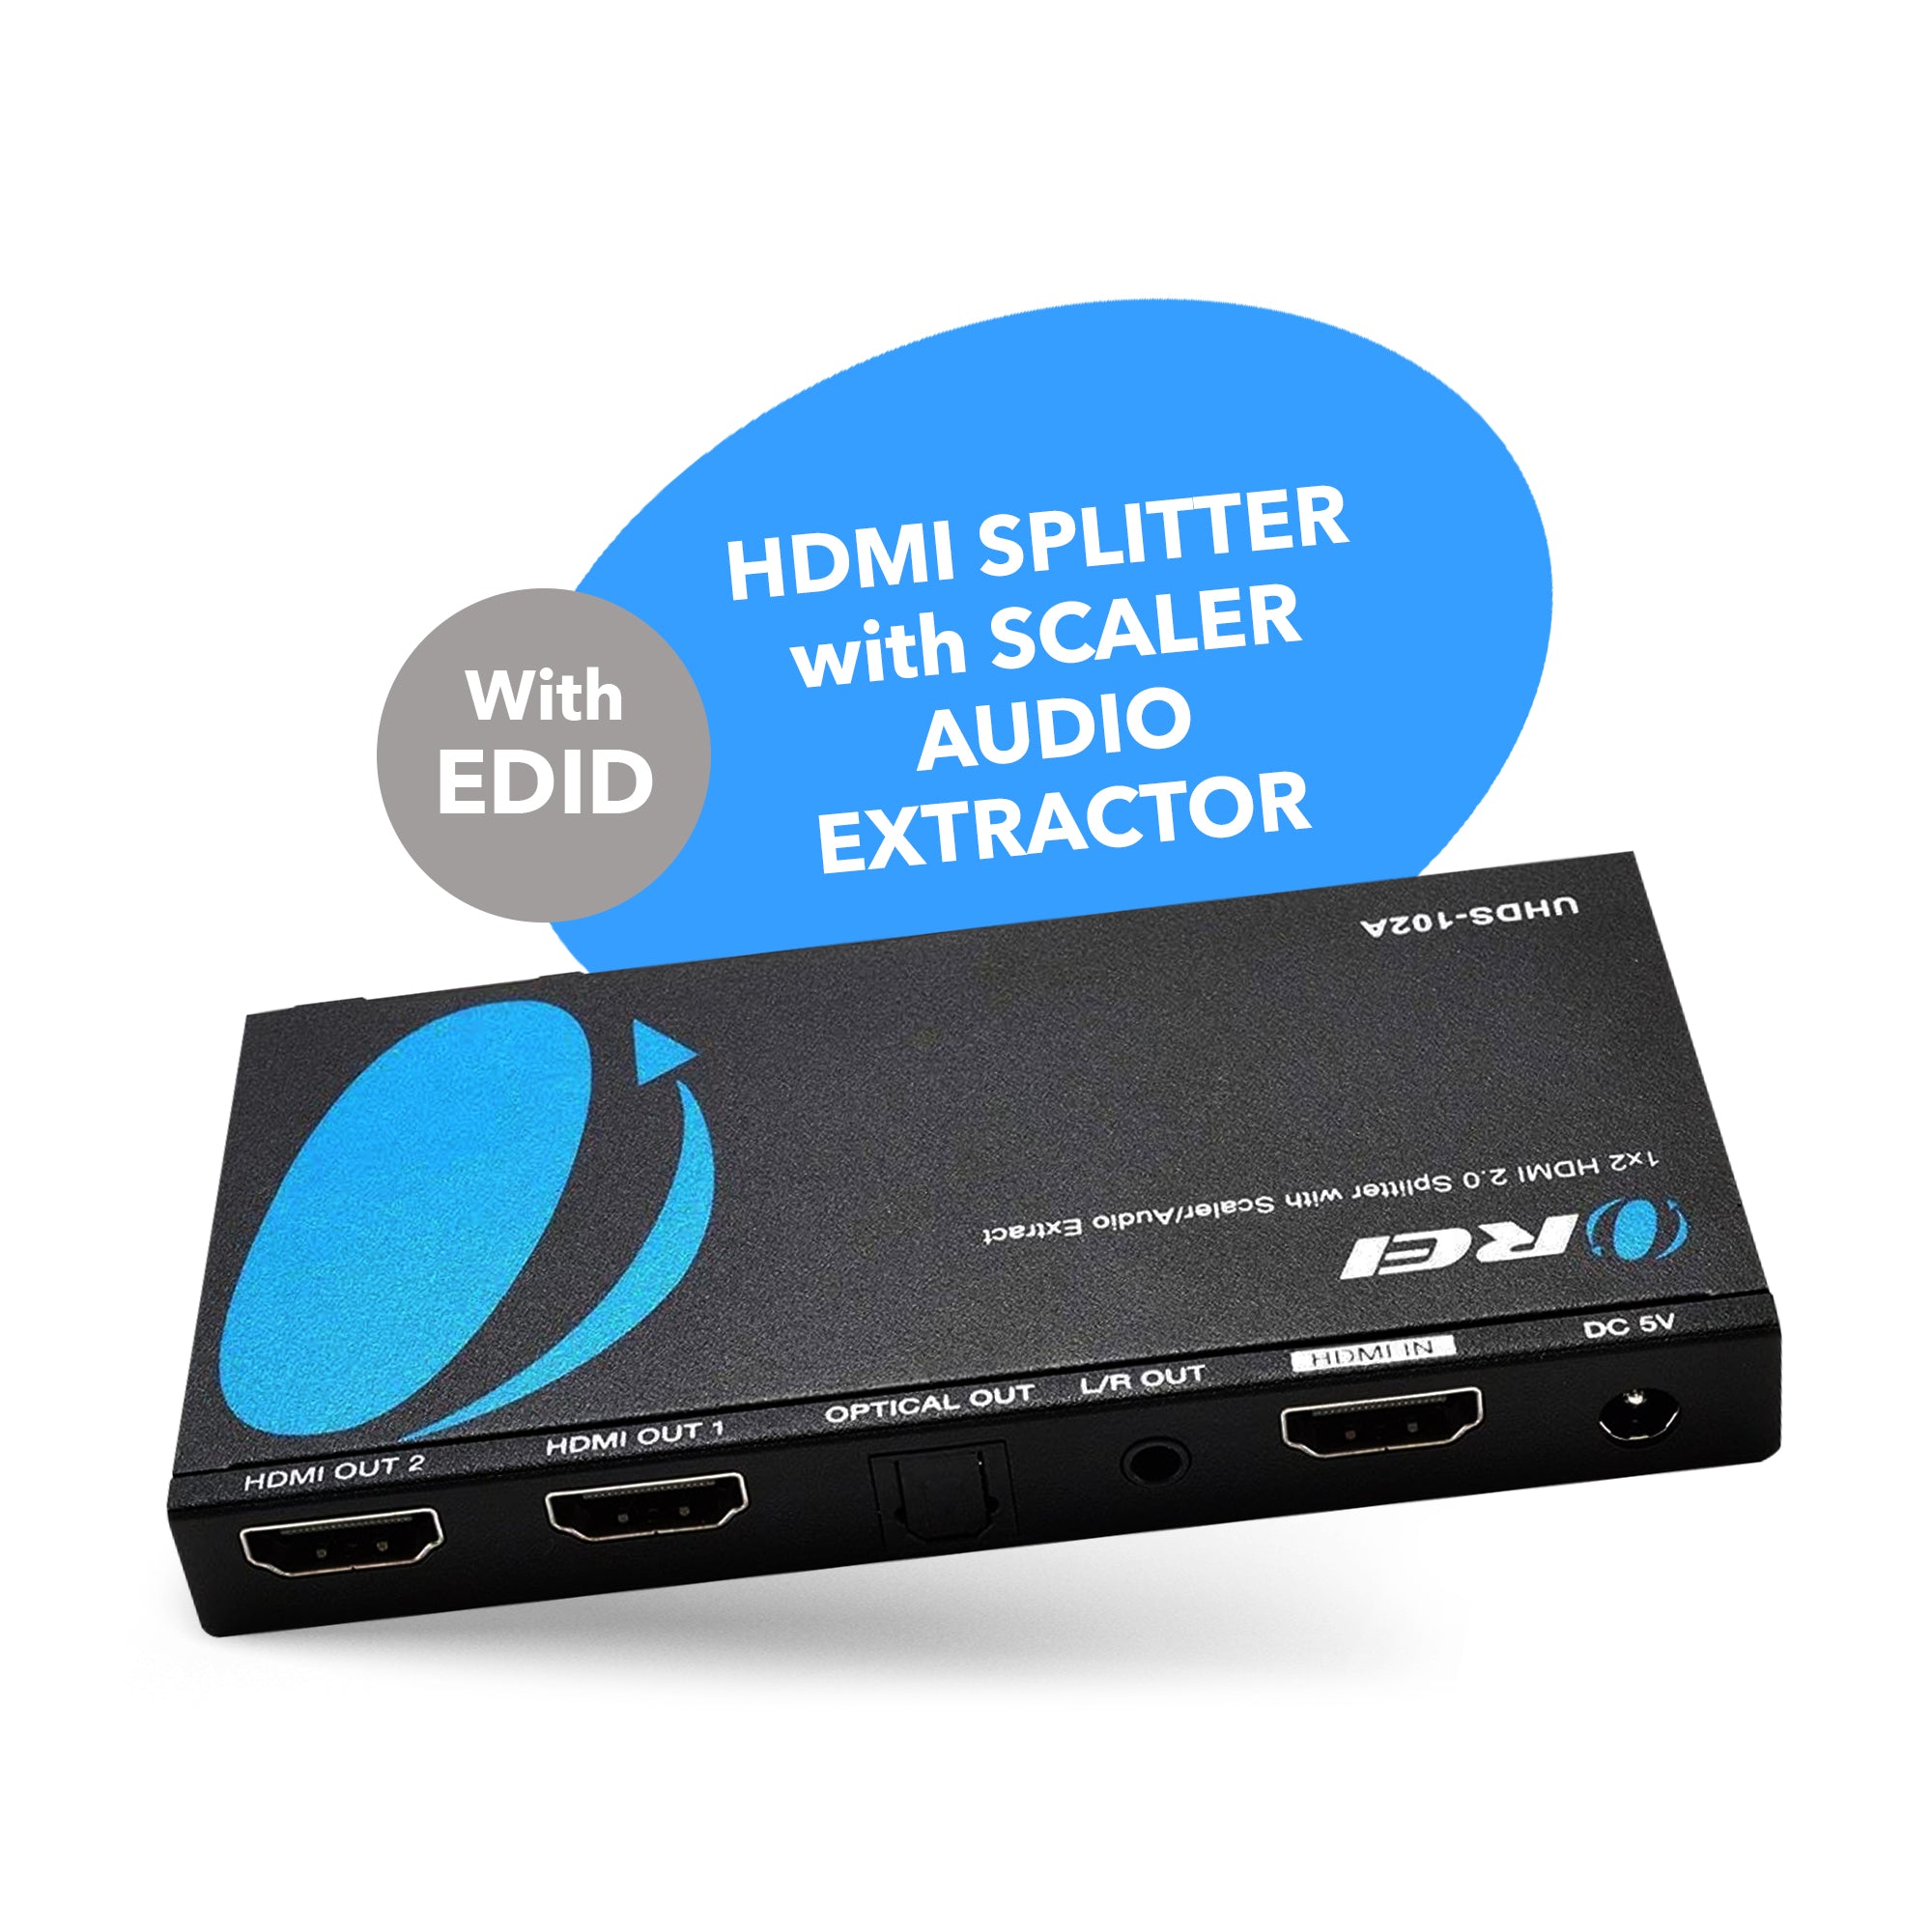 1x2 HDMI Splitter: UltraHD 4K with EDID, Downscale, and Audio Extraction (UHDS-102A) OREI